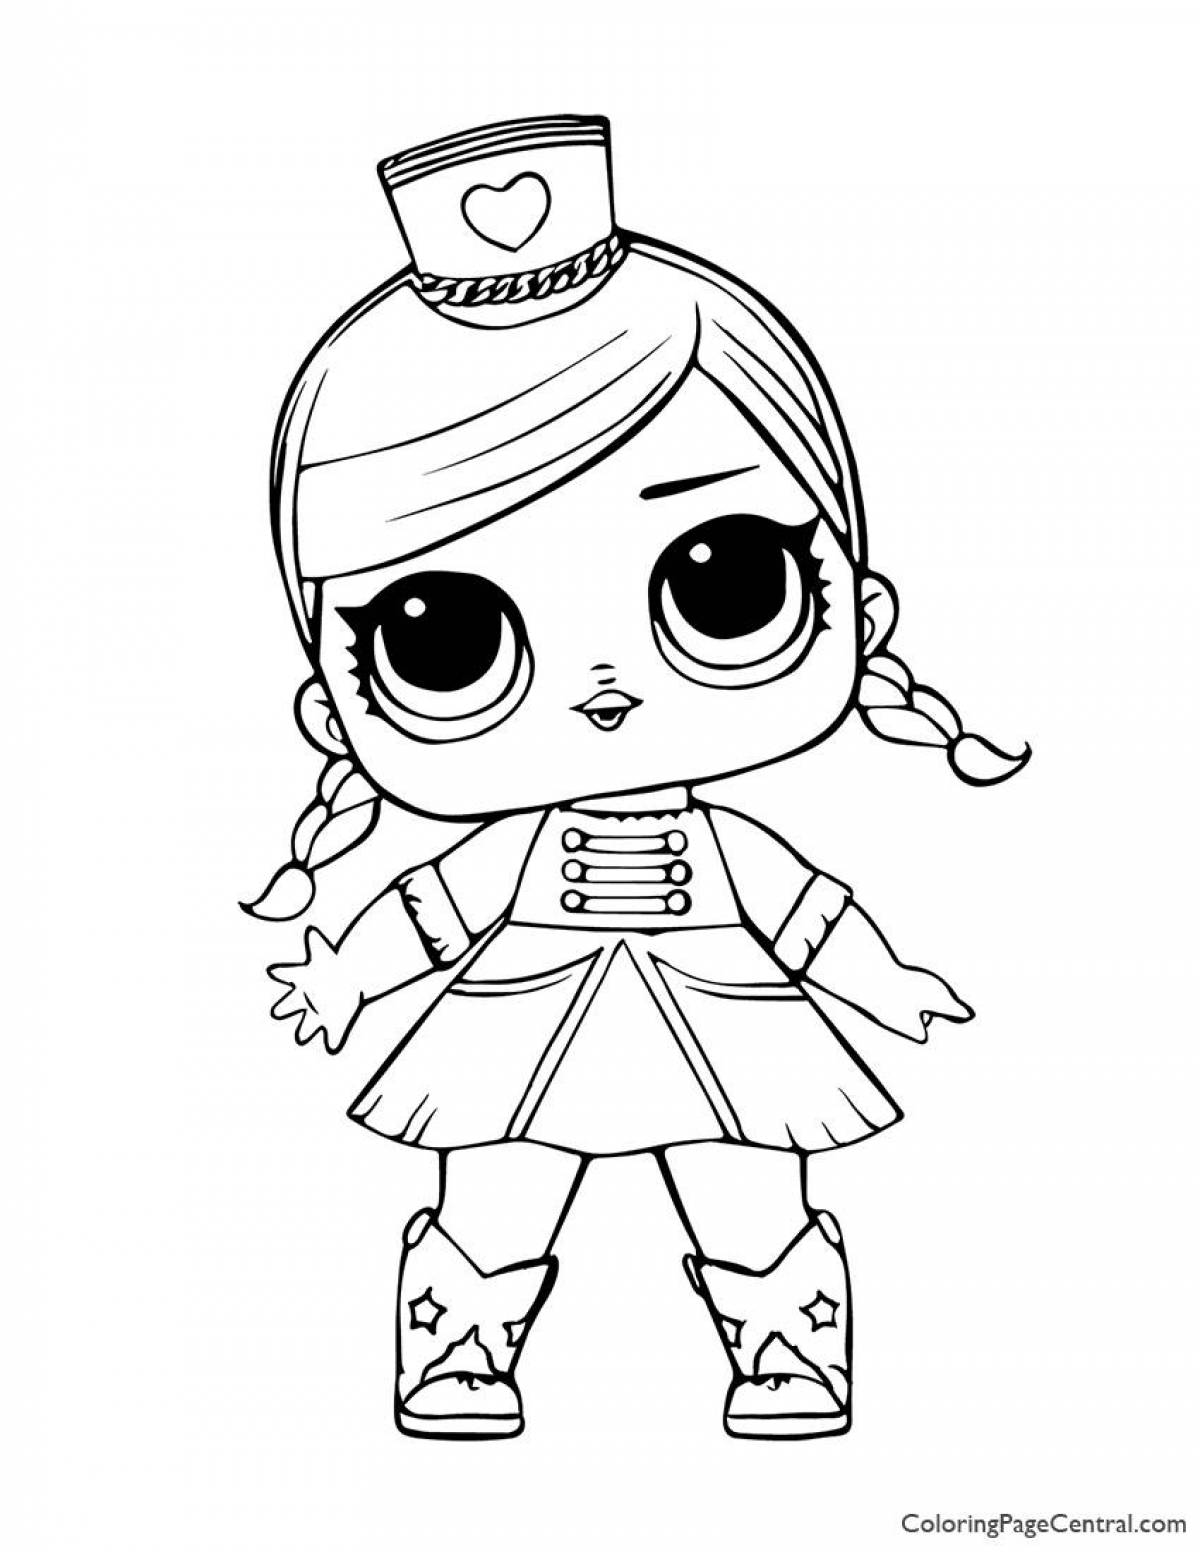 Fancy coloring christmas doll lol